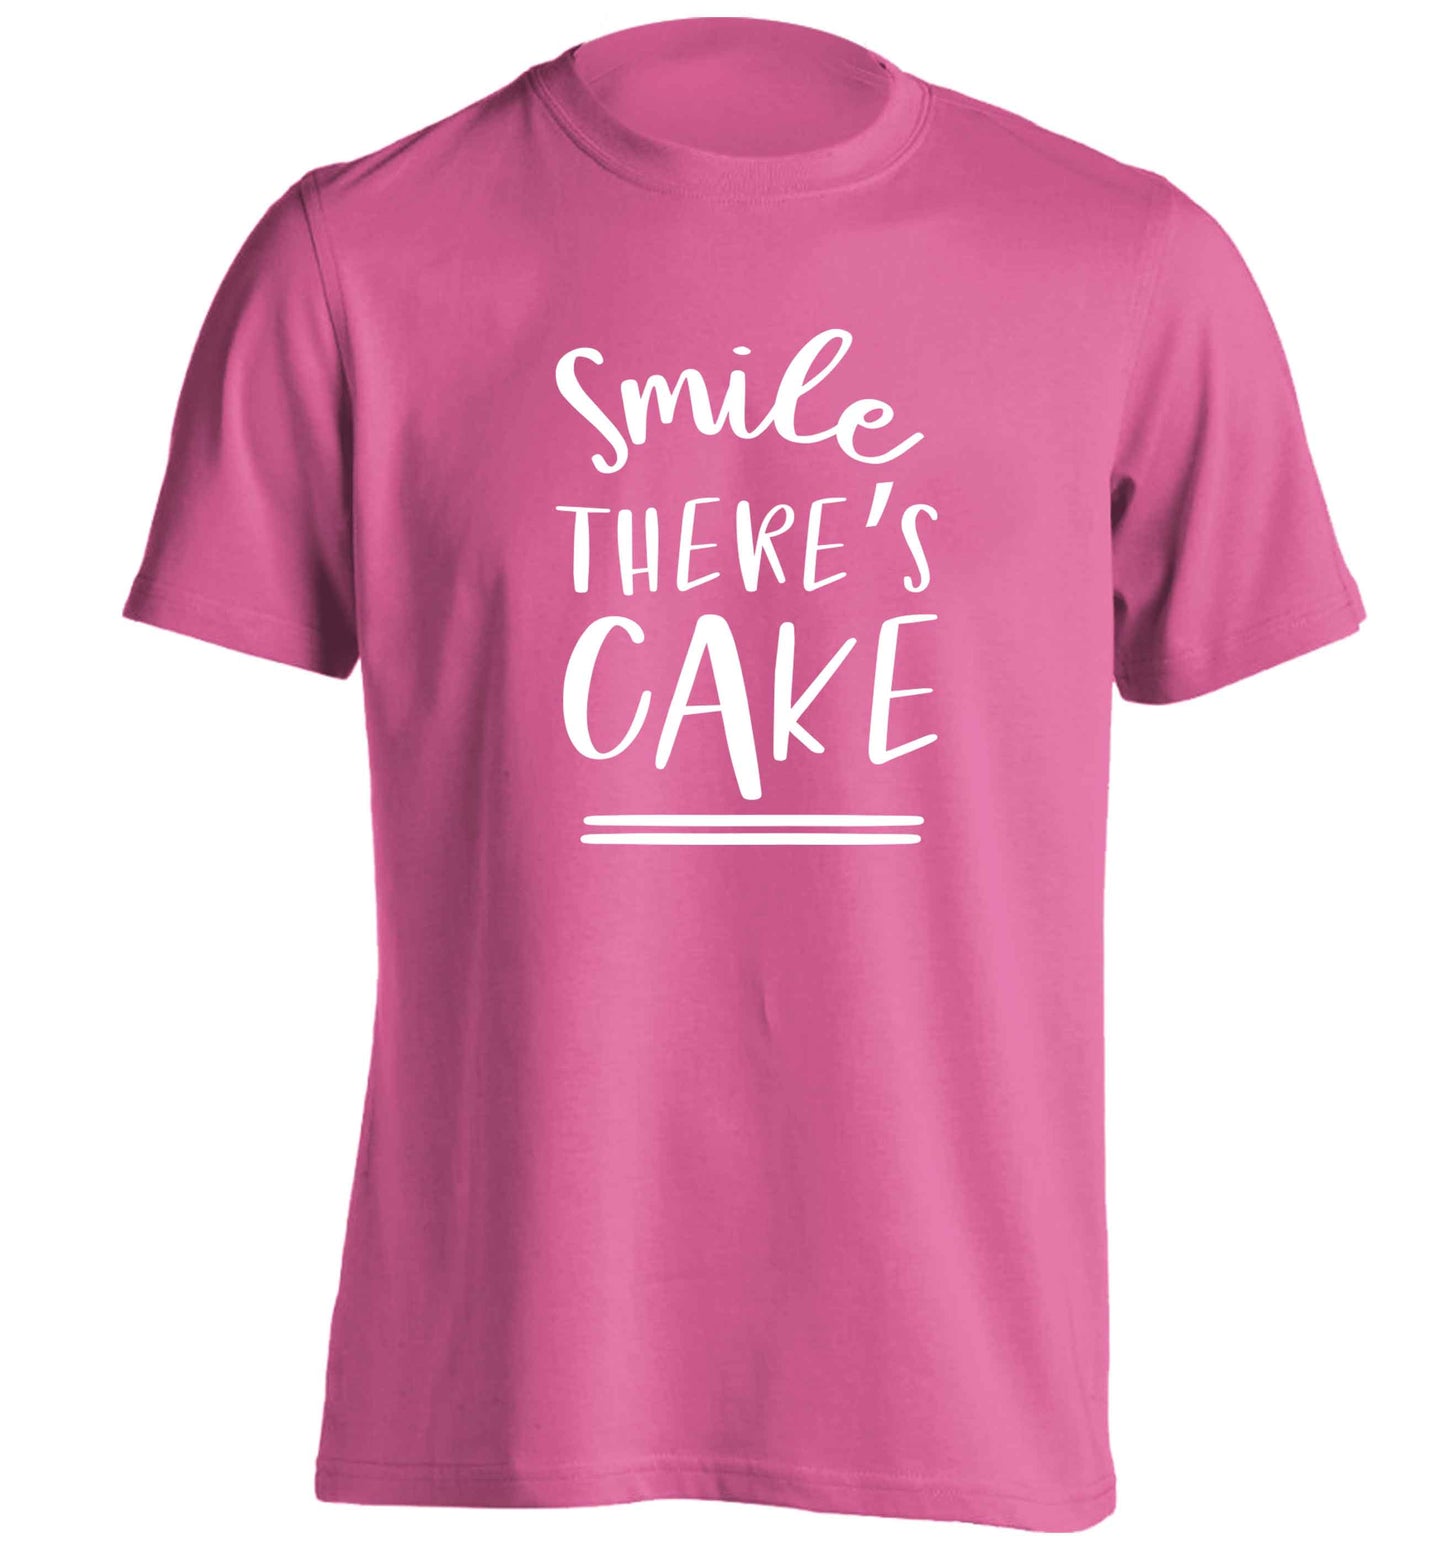 Smile there's cake adults unisex pink Tshirt 2XL